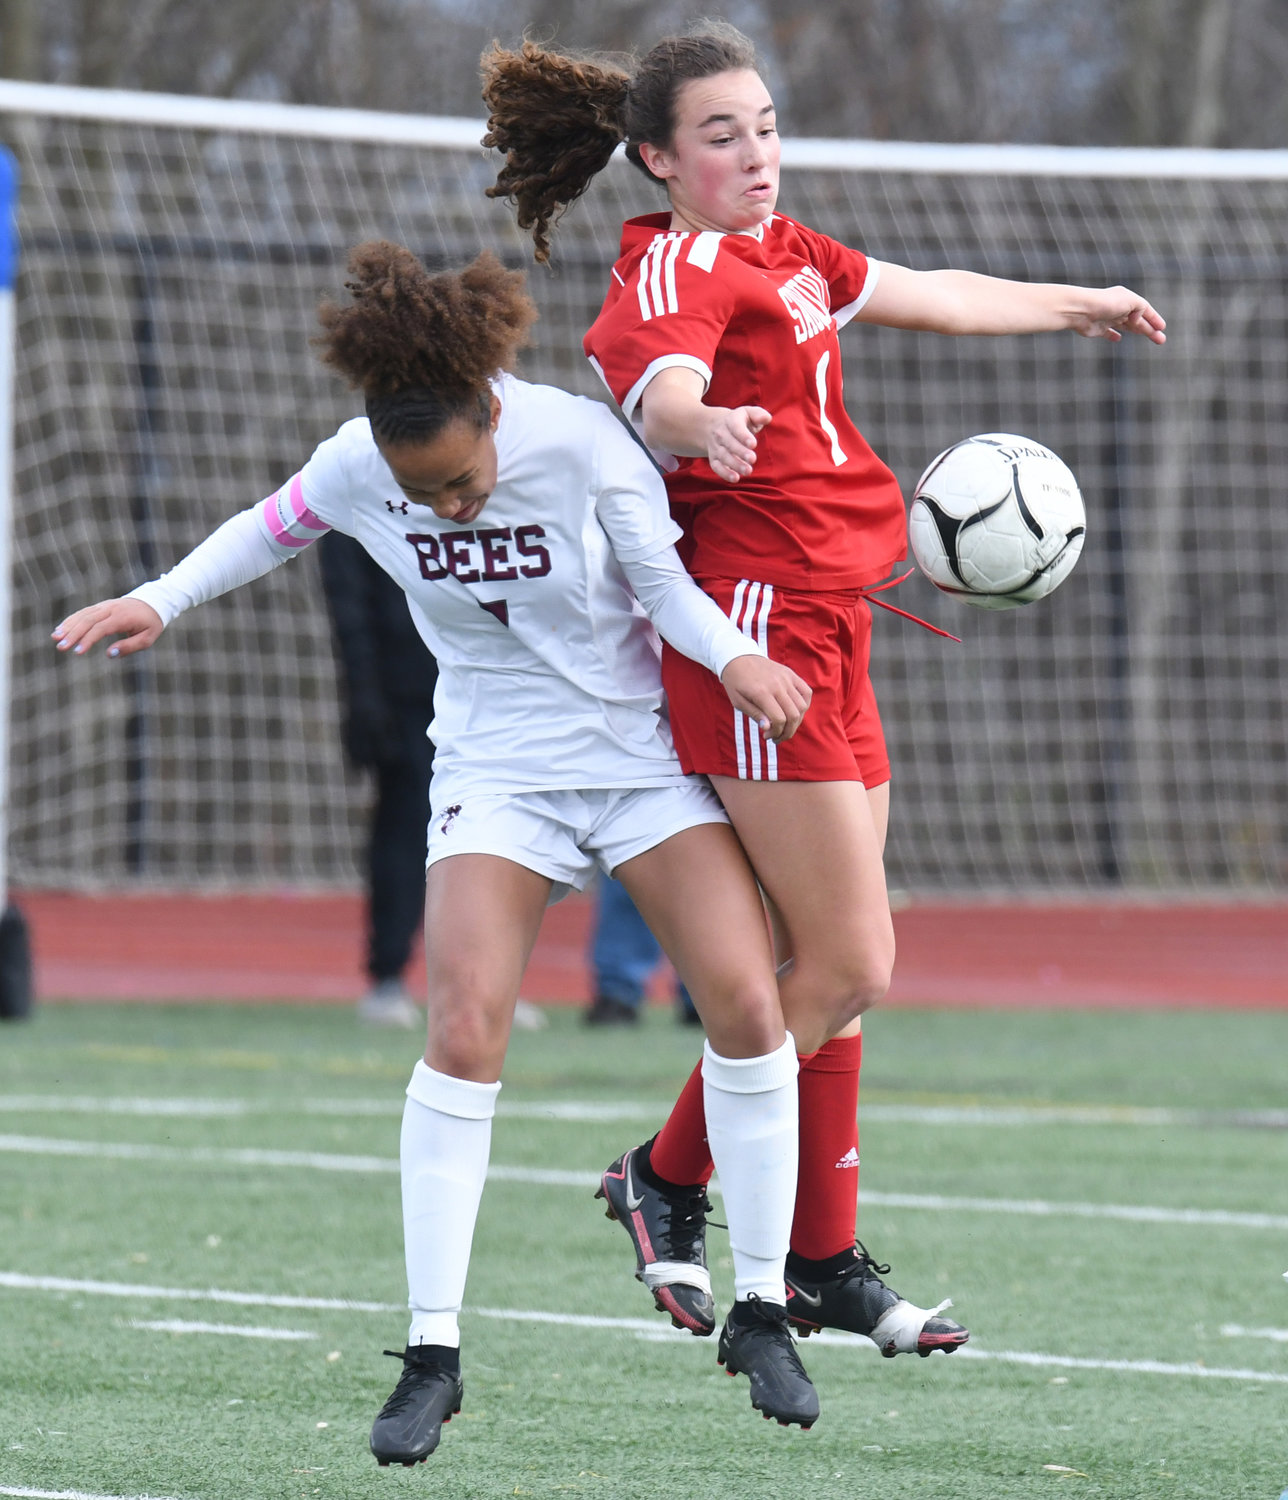 Sauquoit Valley's Ella DiSchiavo, right, and Byron-Bergen's Ava Wagoner collide while trying to play the ball Saturday at Cortland High School in the Class C state semifinals. Sauquoit never trailed, winning 2-1 to advance to the championship game Sunday.